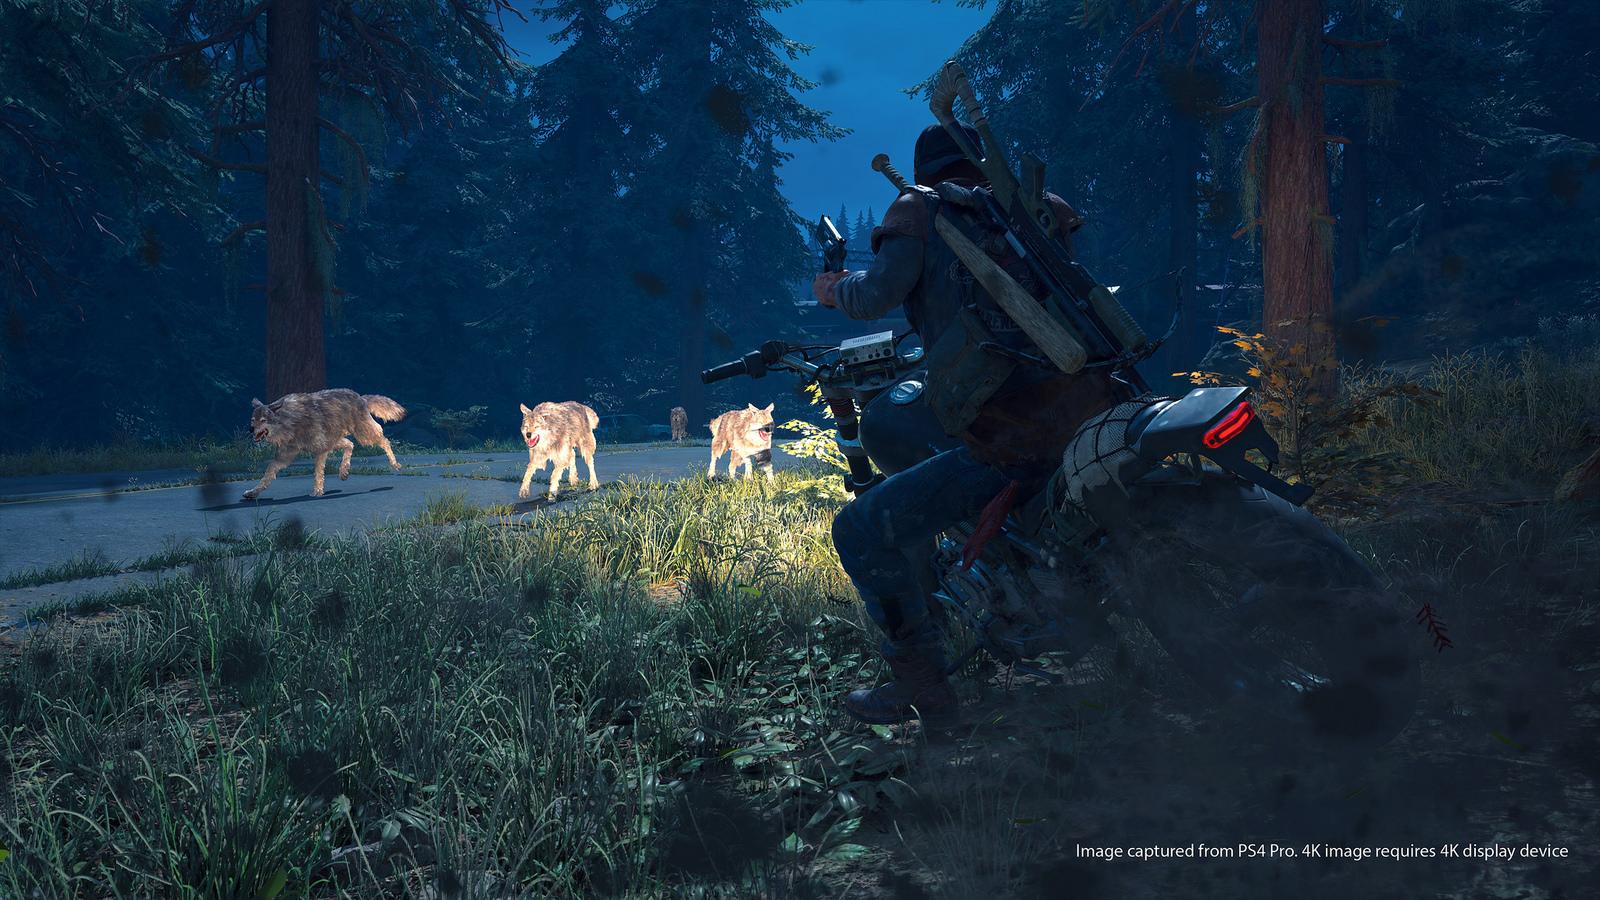 Days Gone Delayed to April 2019; Sony Bend Wants to Move Away From